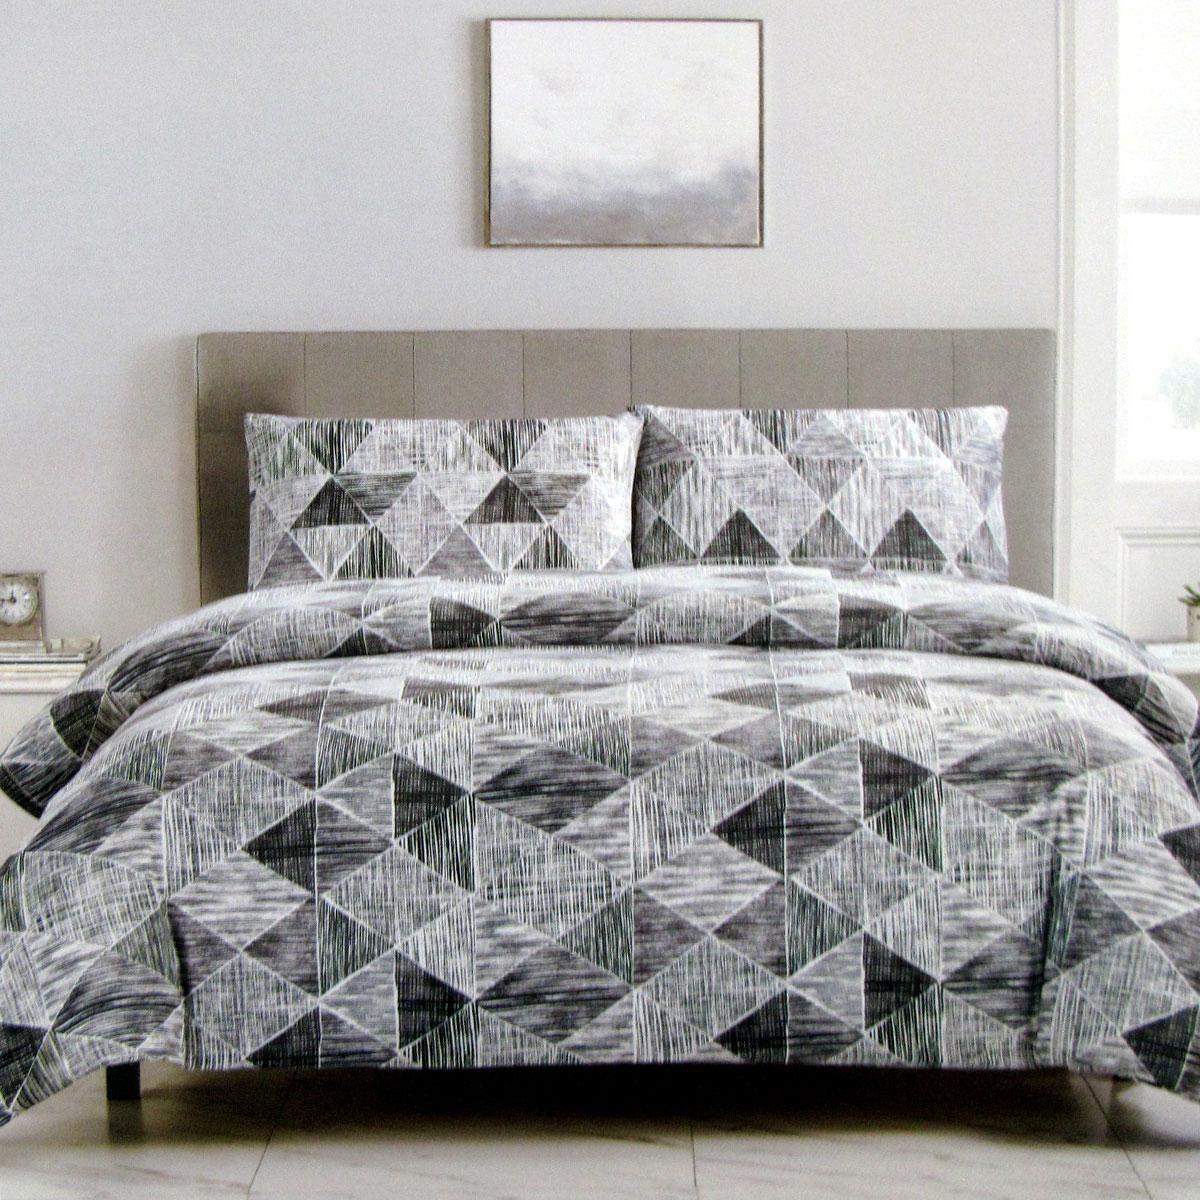 Artex Charcoal Black Avery Lines Pattern Printed Microfiber Polyester Quilt Cover Set Single